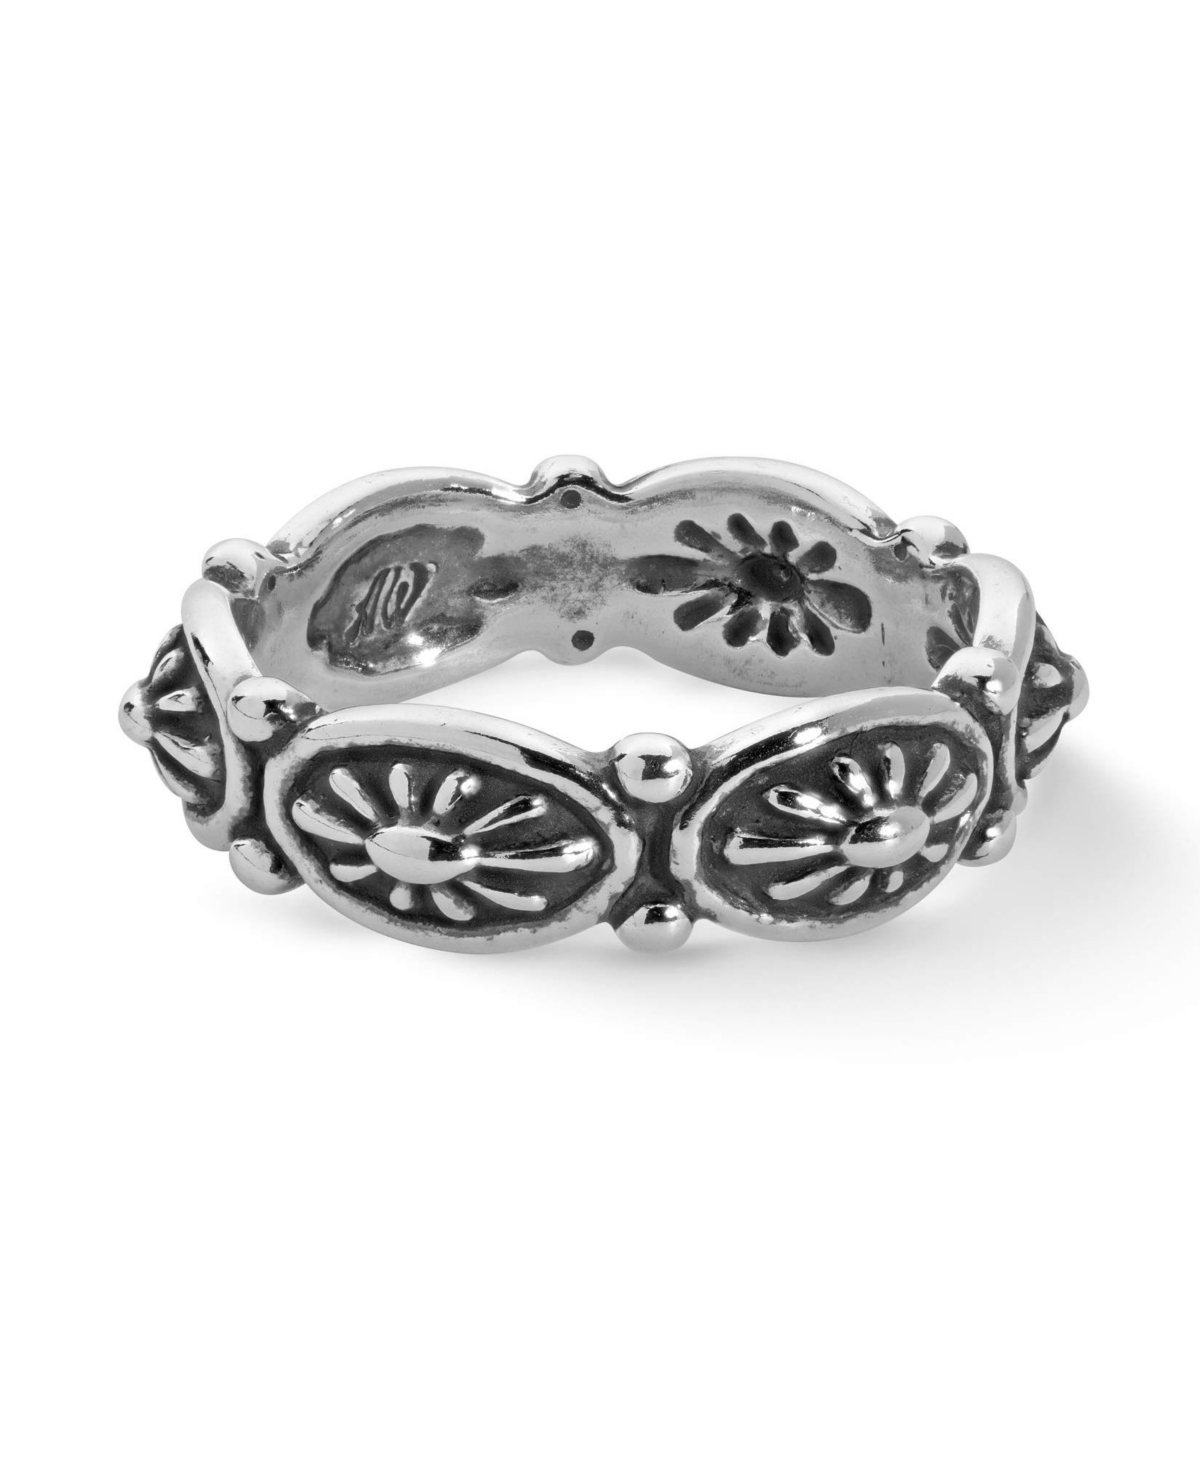 Sterling Silver Women's Ring, Concha Design, Sizes 5 - 10 - Sterling silver